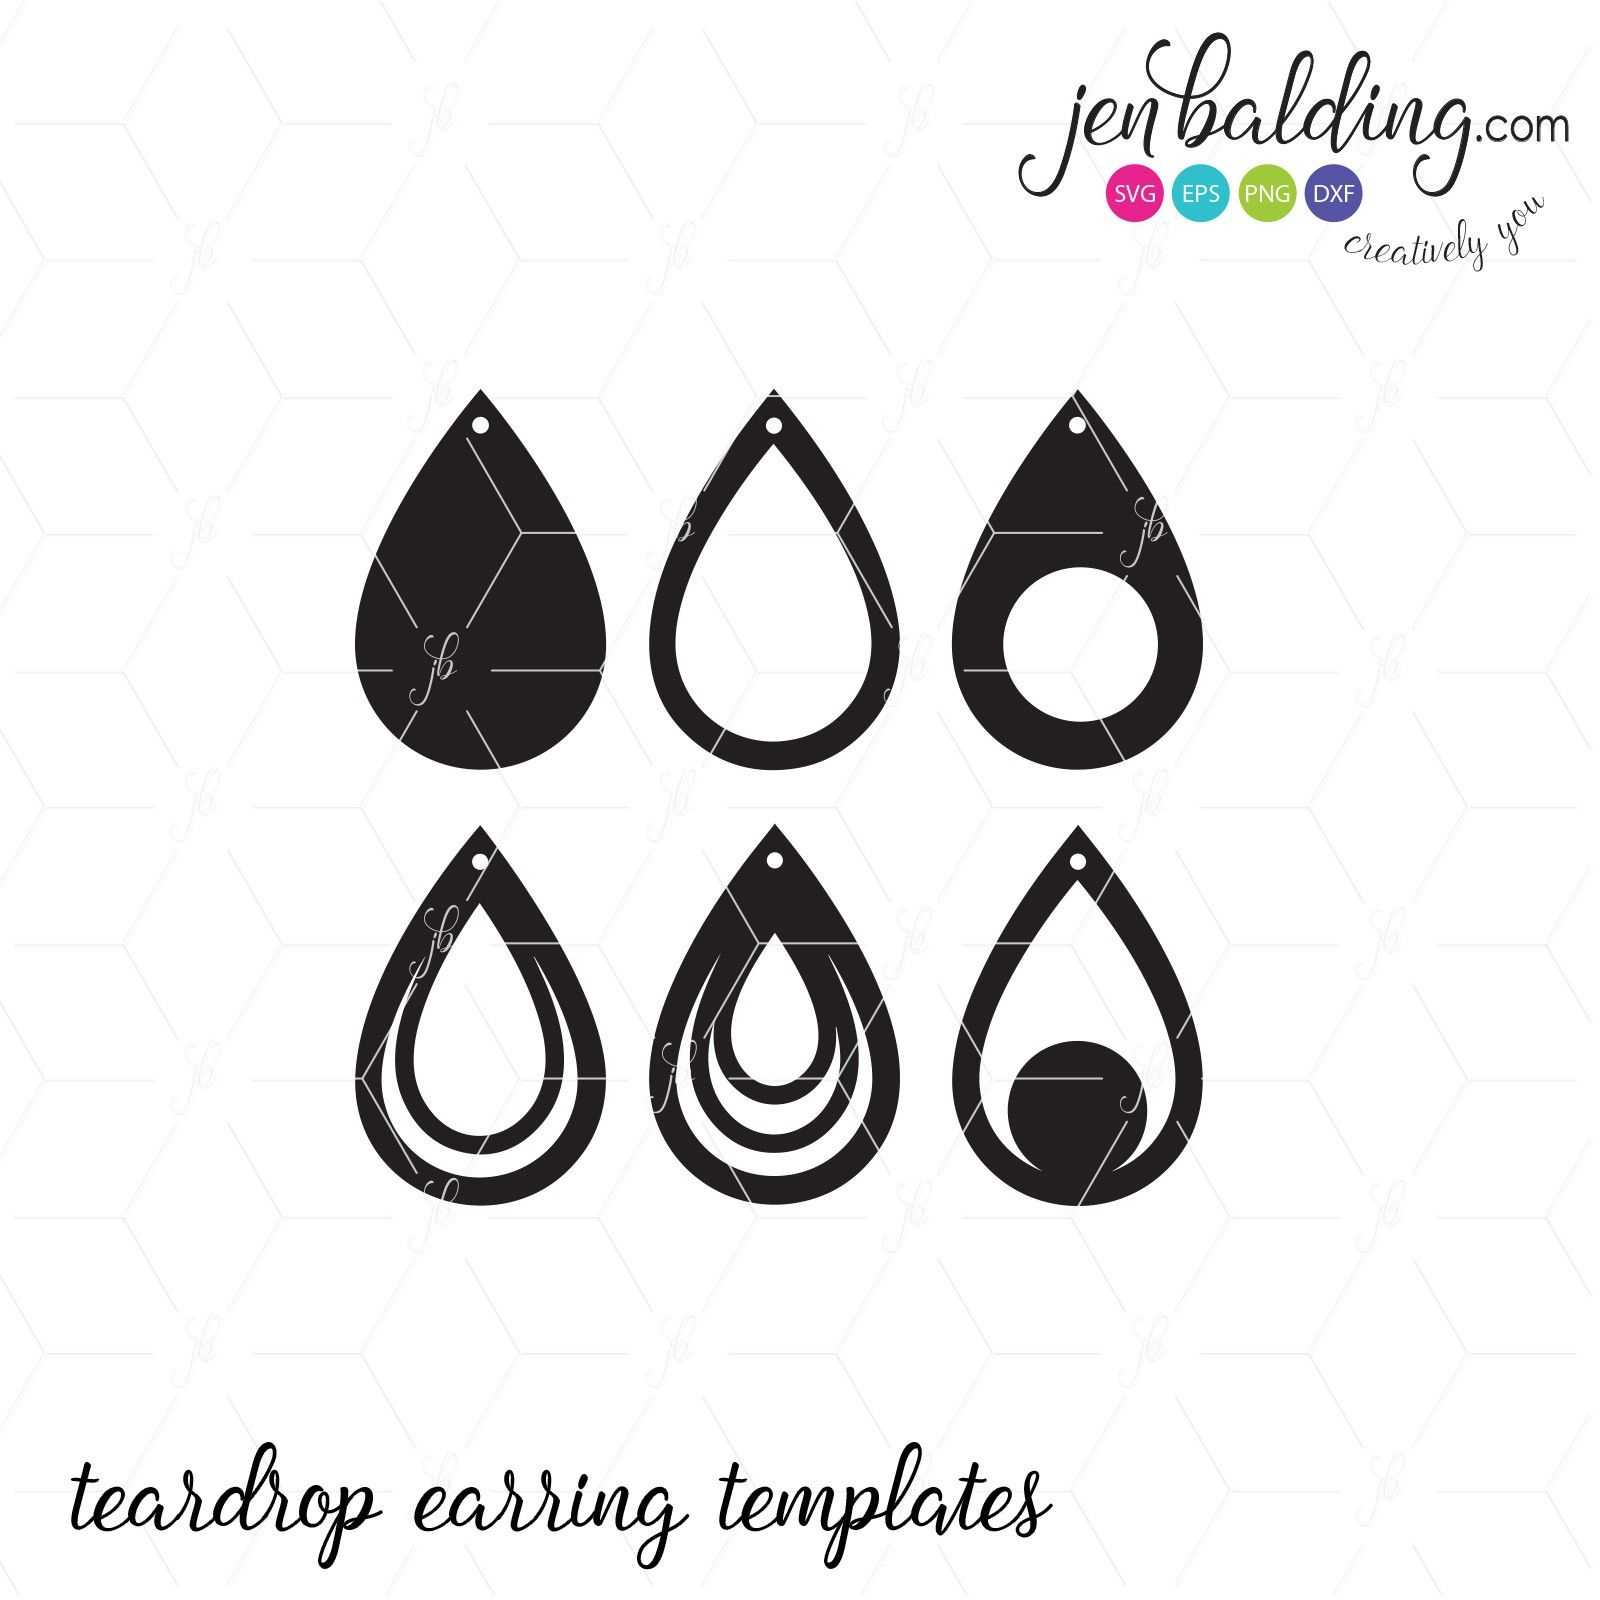 Free Svg Card Templates | Best  | Leather Earrings, How In Free Svg Card Templates